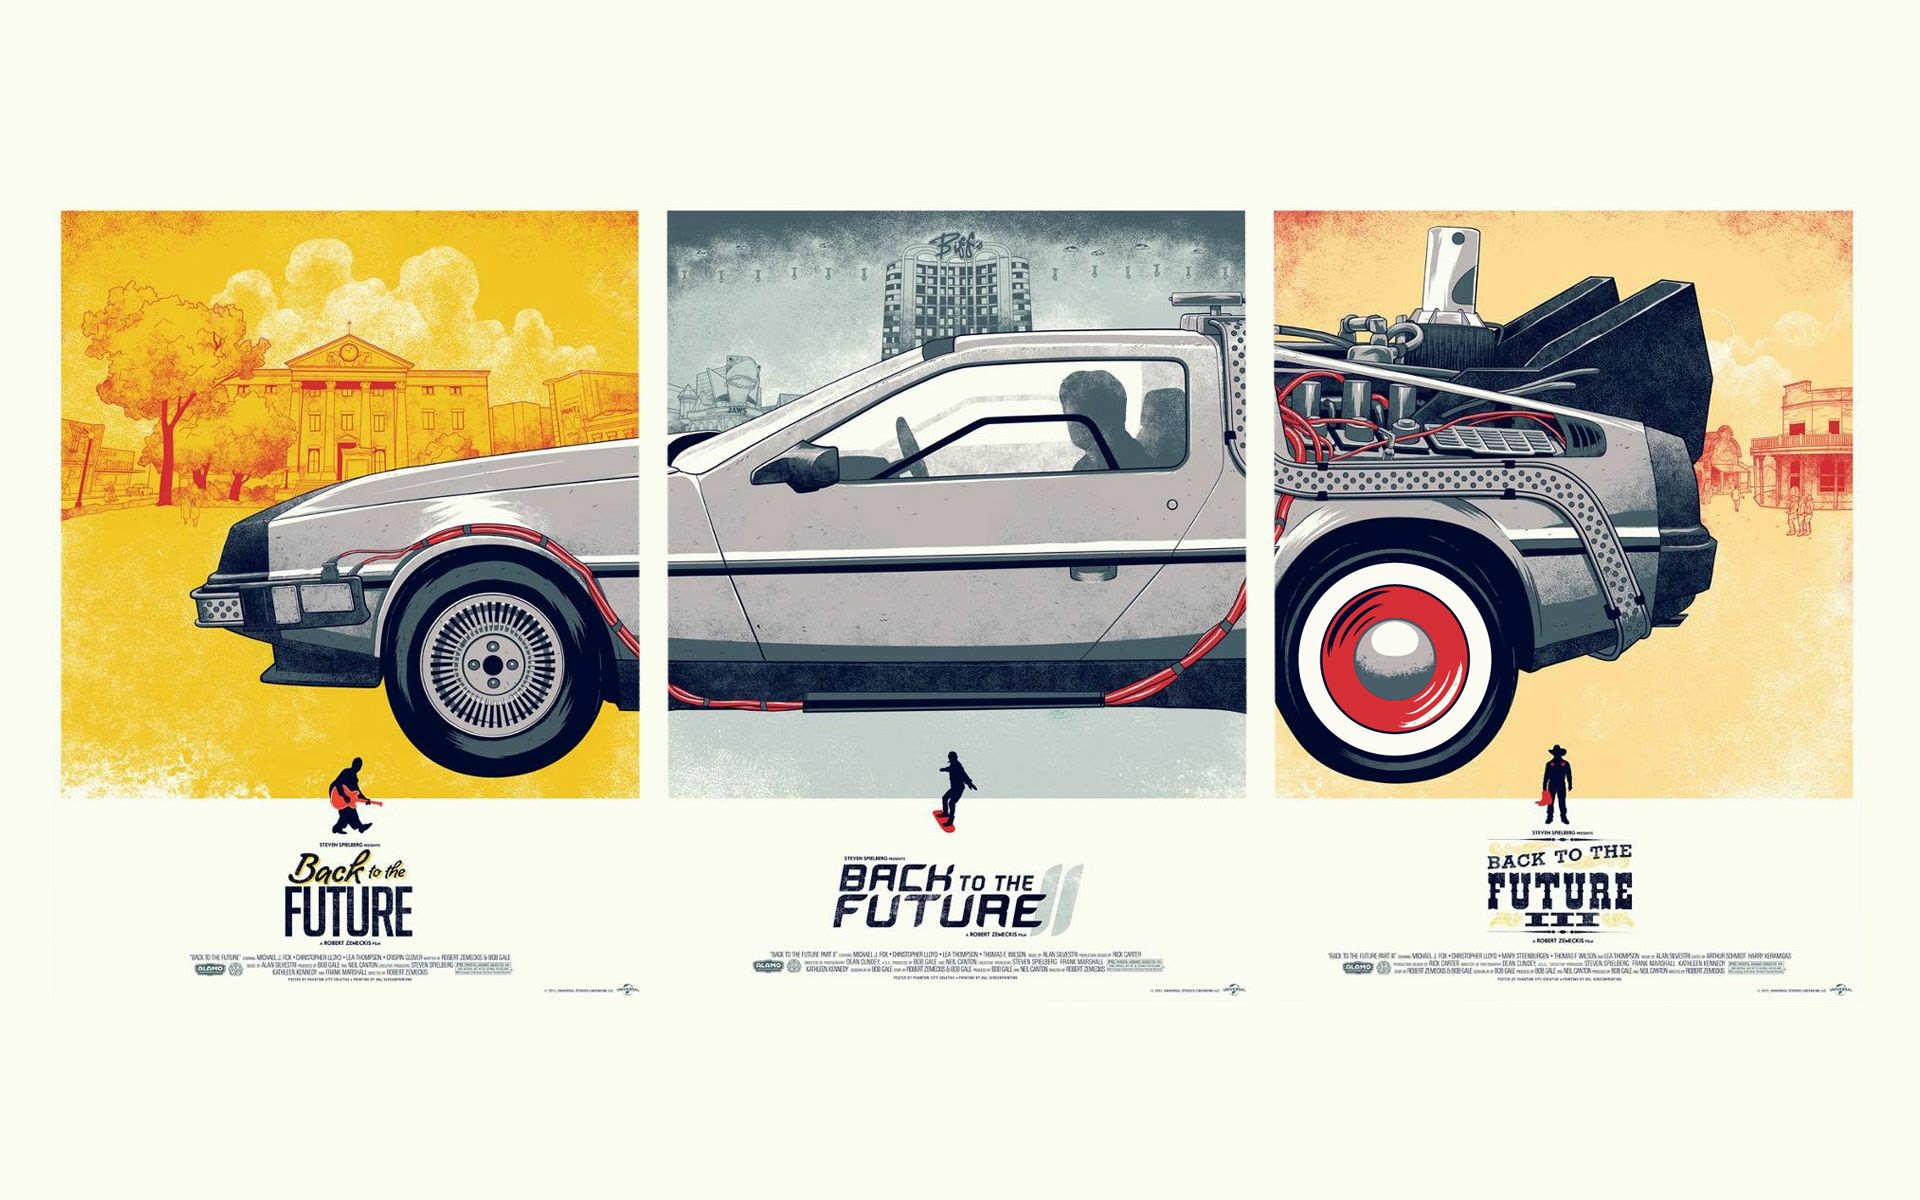 Back to the Future Series wallpaper. Back to the Future Series